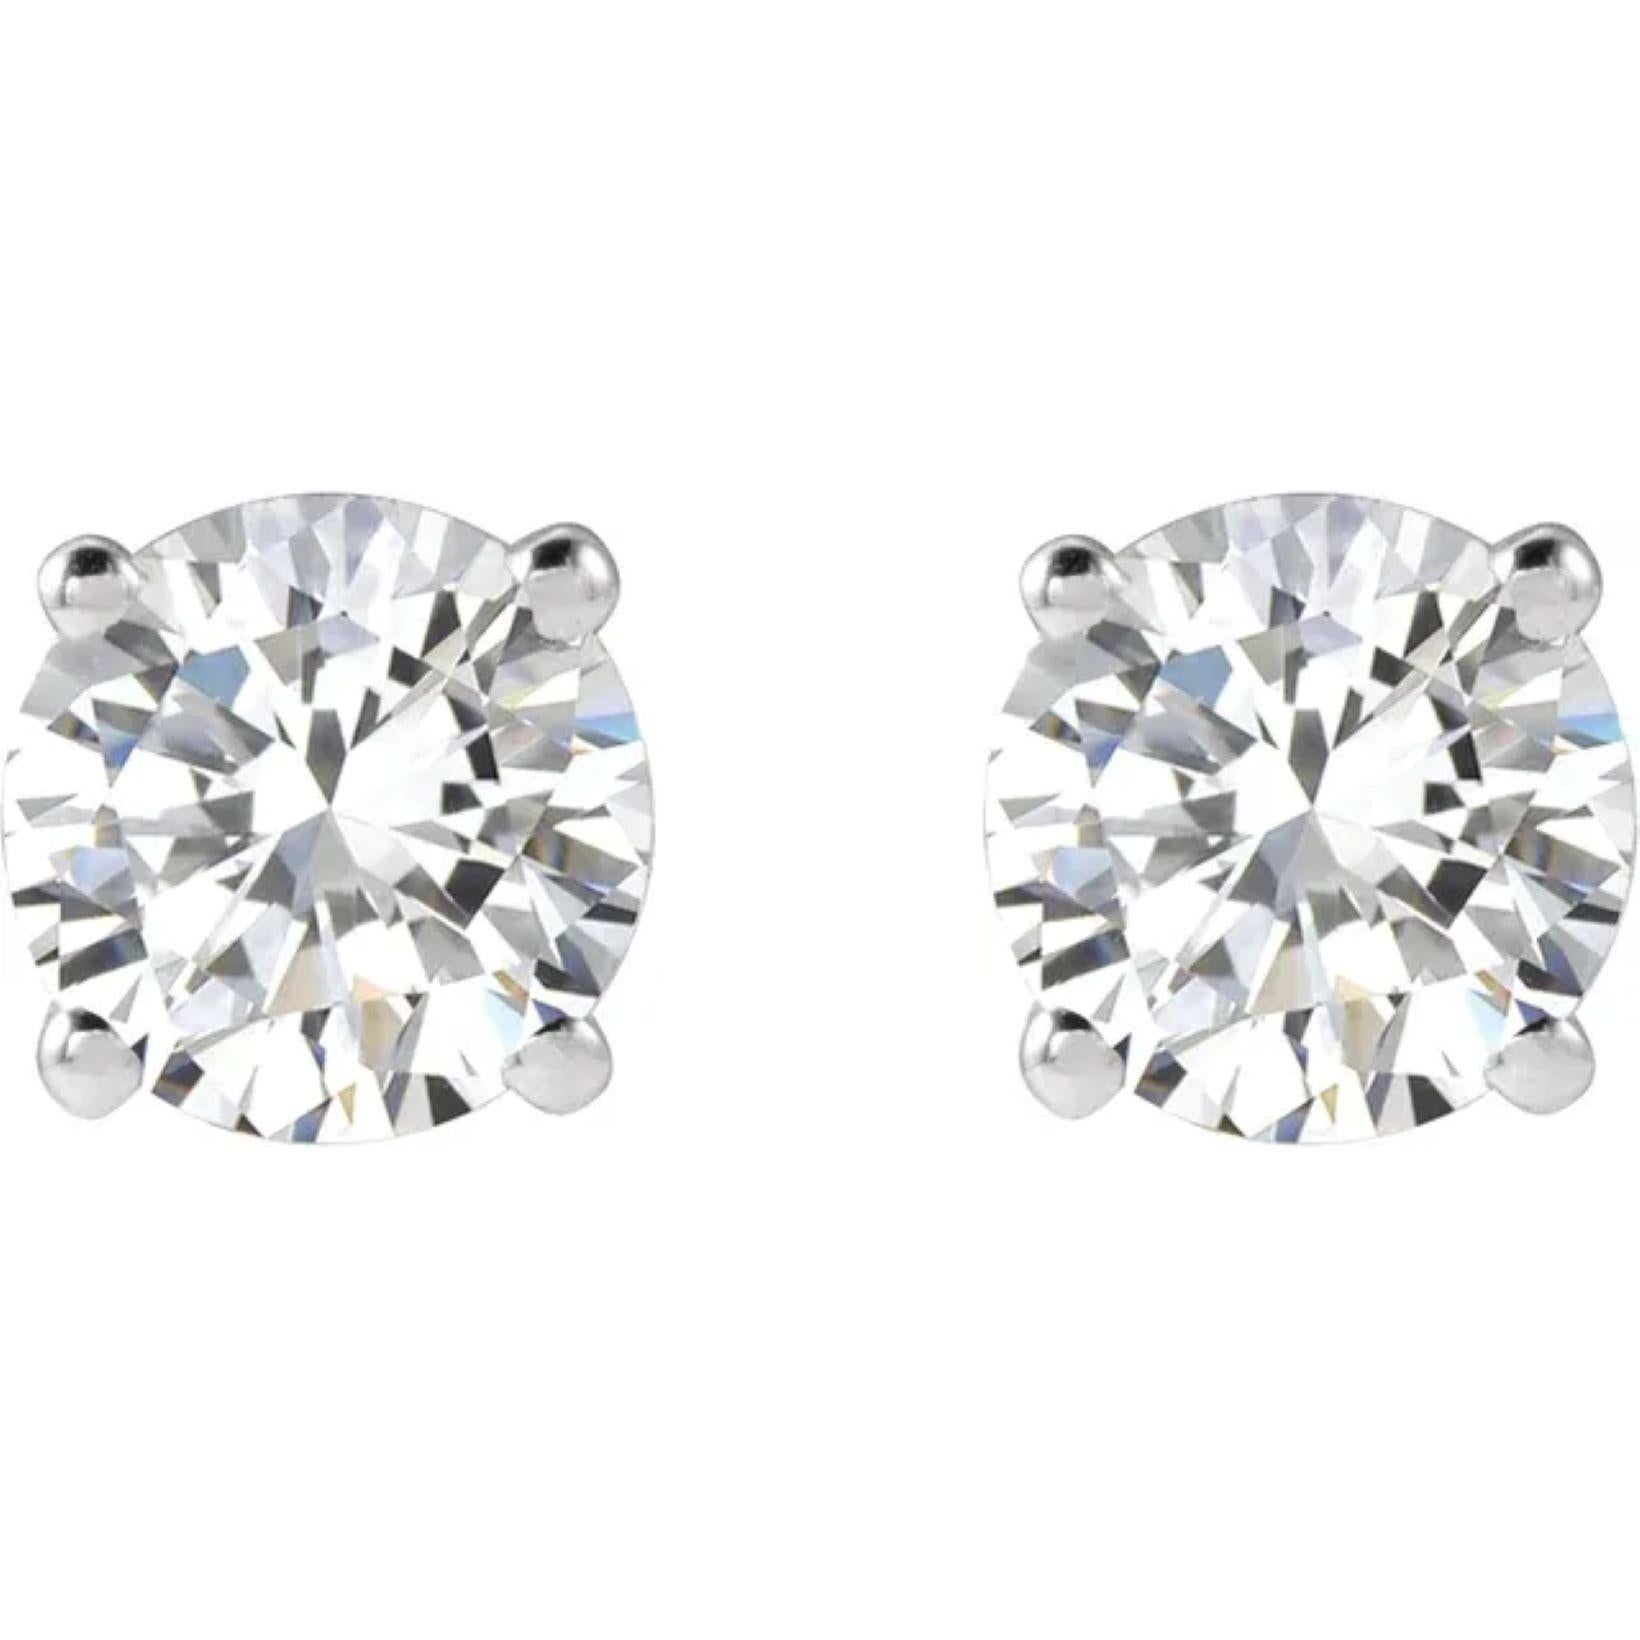 Quantity	Stone
2	04.75 - 05.25 MM Full Cut, I2 ROUND - PAIR FULL CUT G-H NATURAL DIAMOND
Specifications
Weight:	0.497 DWT (0.77 grams)
Primary Stone Count:	2-stone
Solid/Hollow:	Solid
Primary Stone Type:	Natural Diamond
Gender:	Unisex
Prong